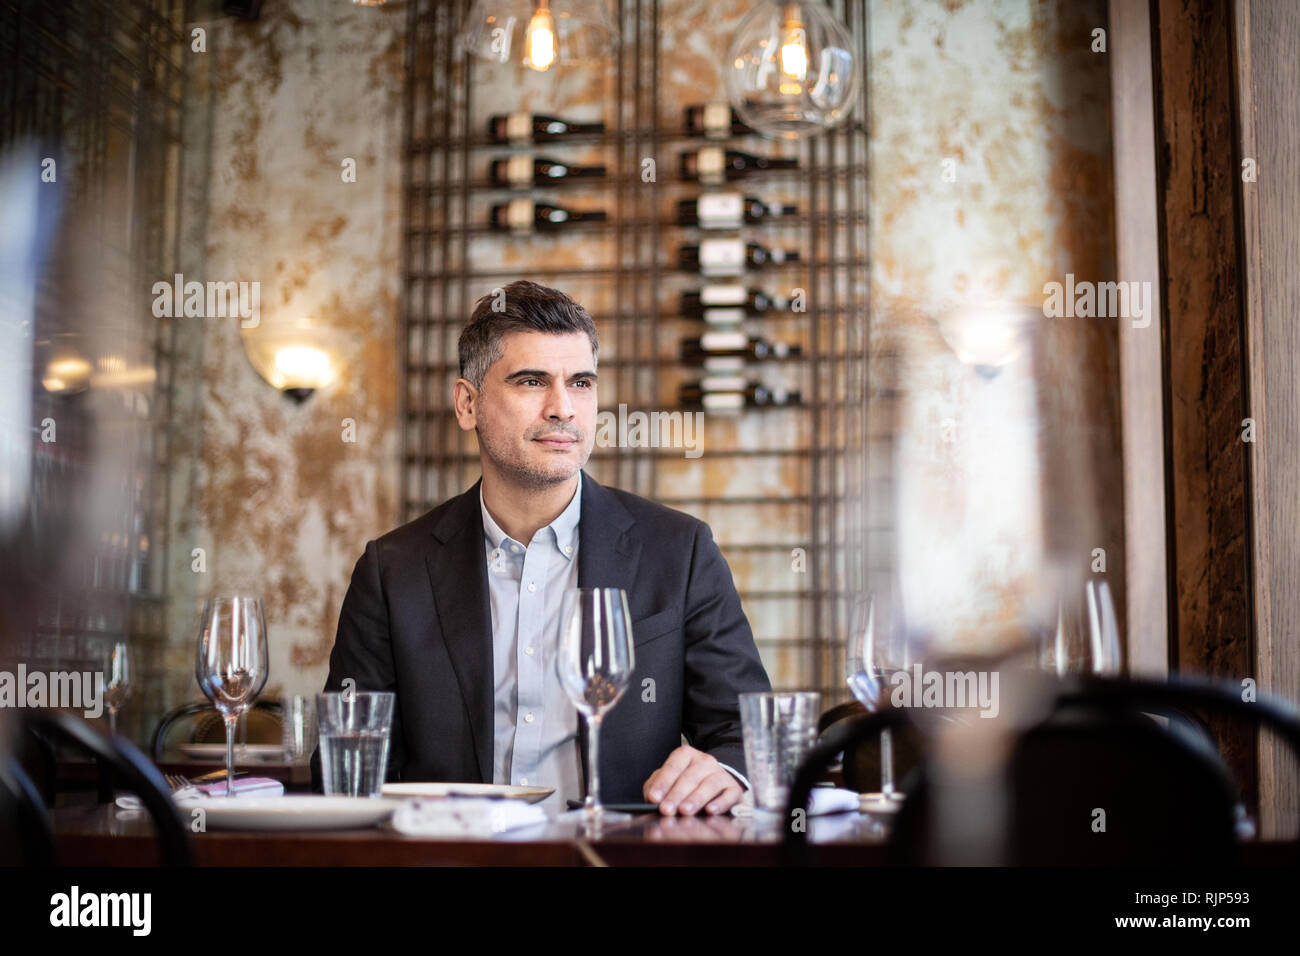 Businessman thinking in a restaurant Stock Photo